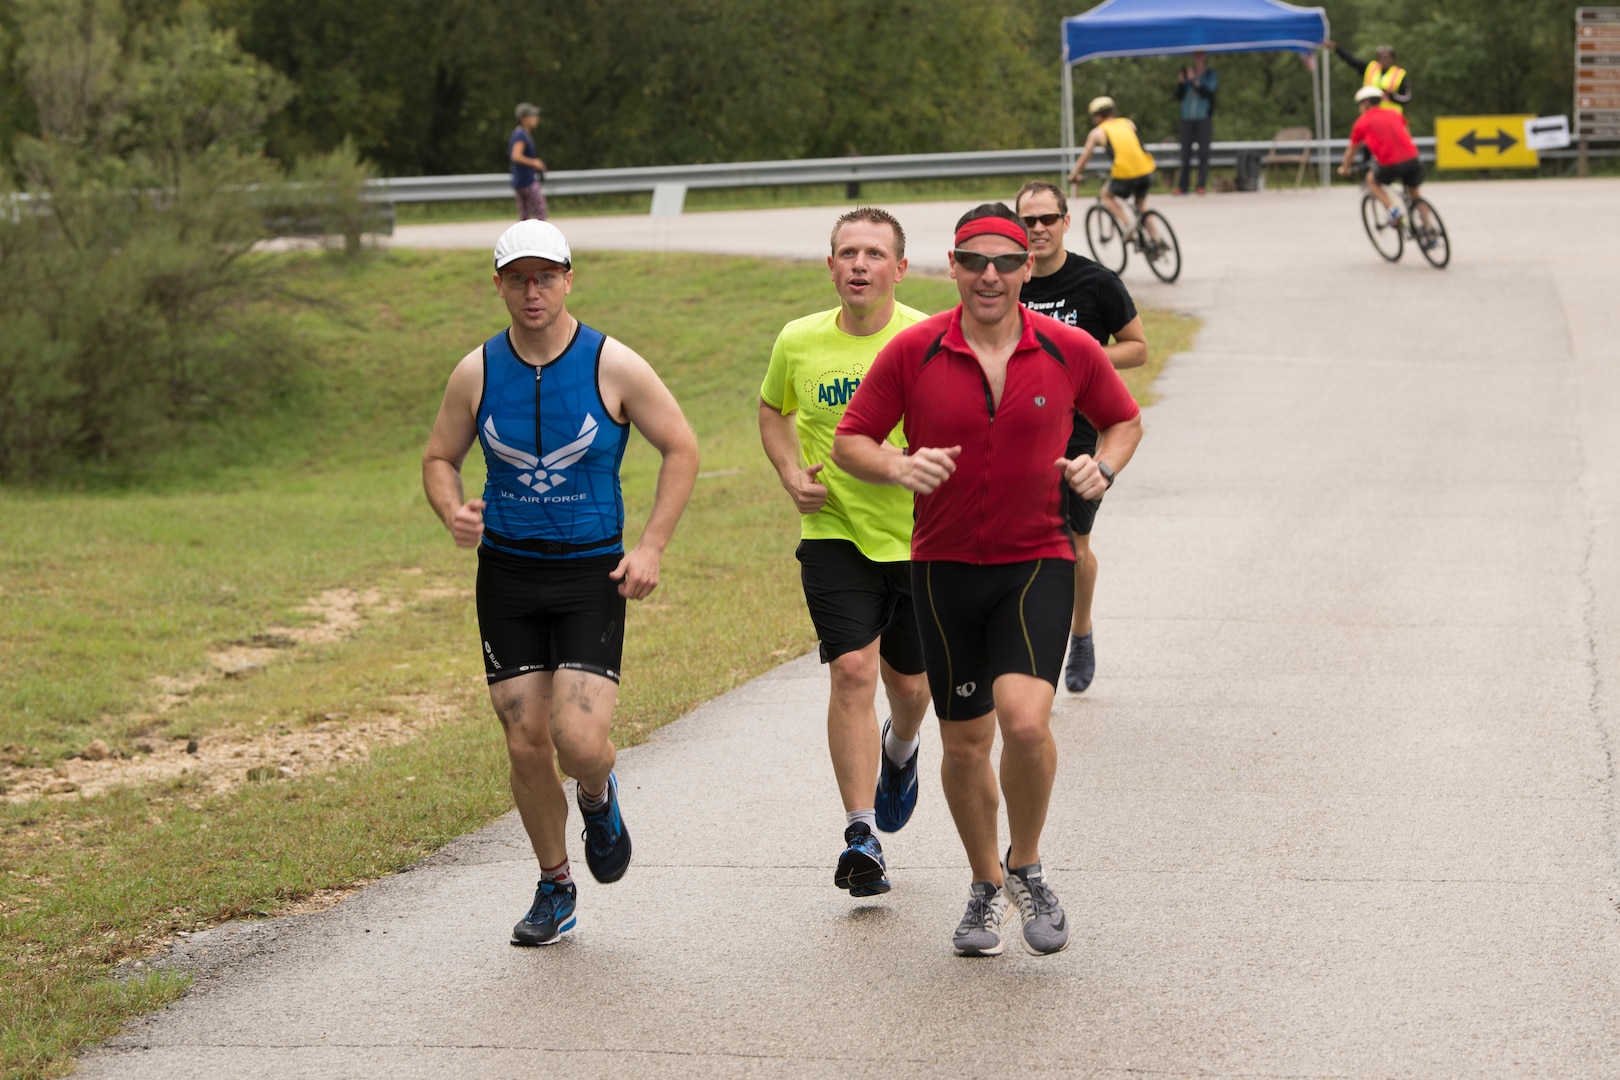 Members of Joint Base San Antonio compete in the Rambler 120 Oct. 13, 2018, at JBSA Recreation Area at Canyon Lake, Texas.